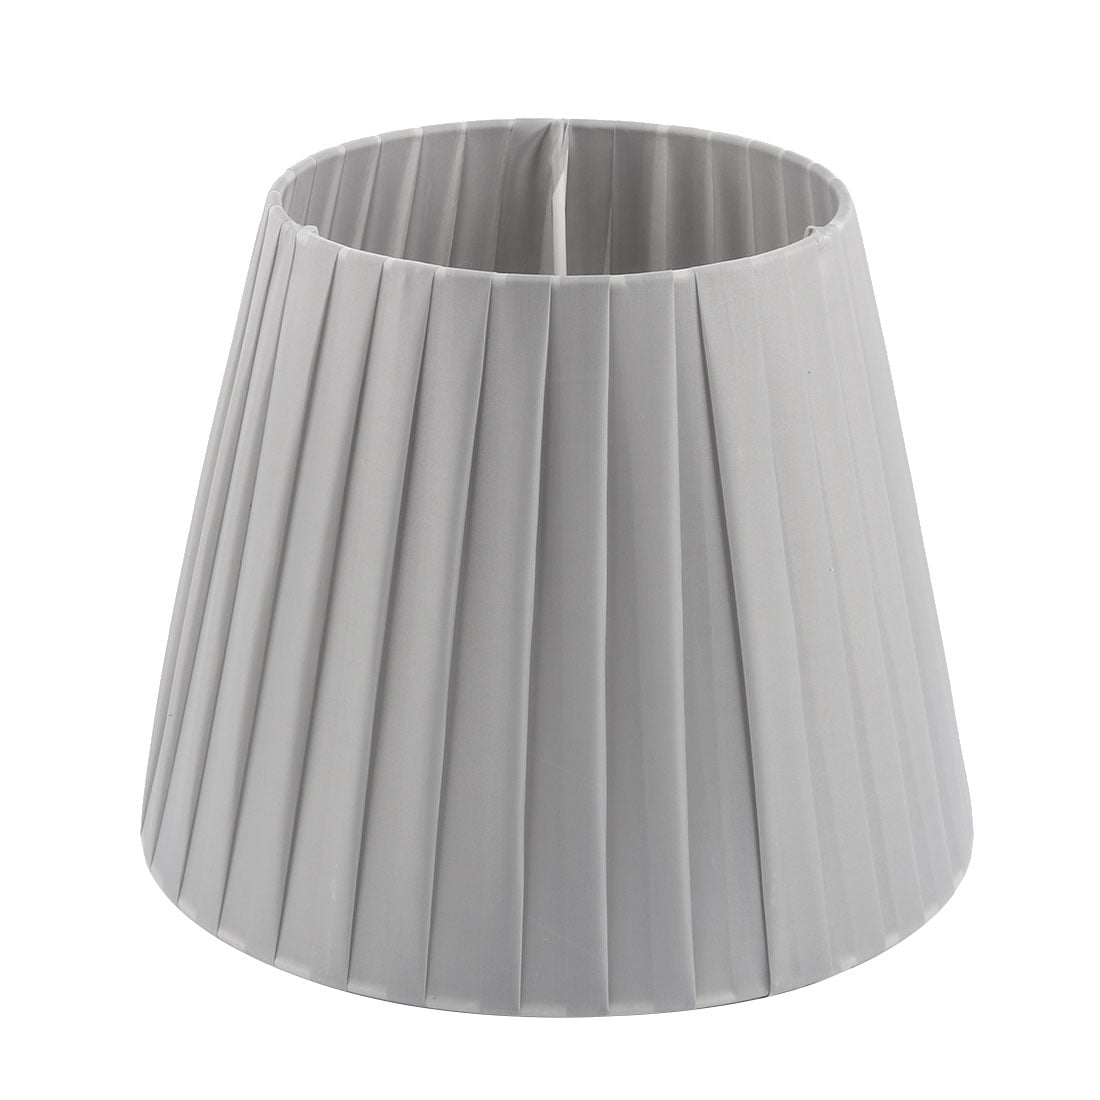 Wall Bedside Floor Lamp Shade Cover Silver Gray 6 3x9 4x7 5inch